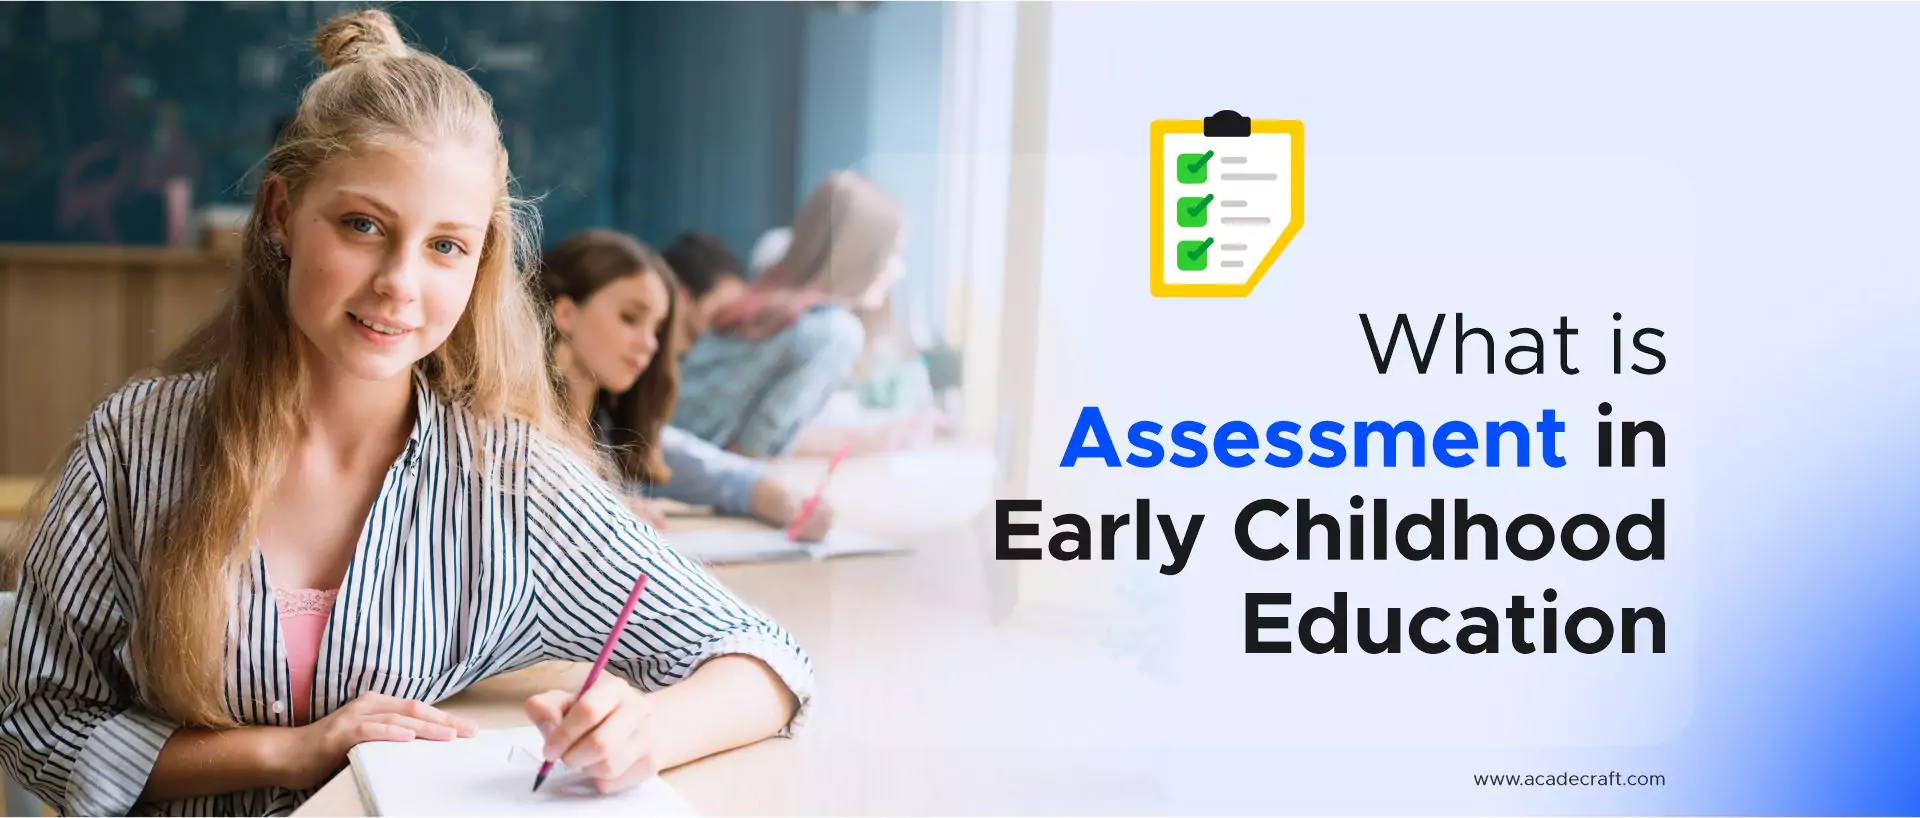 Importance of Assessment in Early Childhood Education'